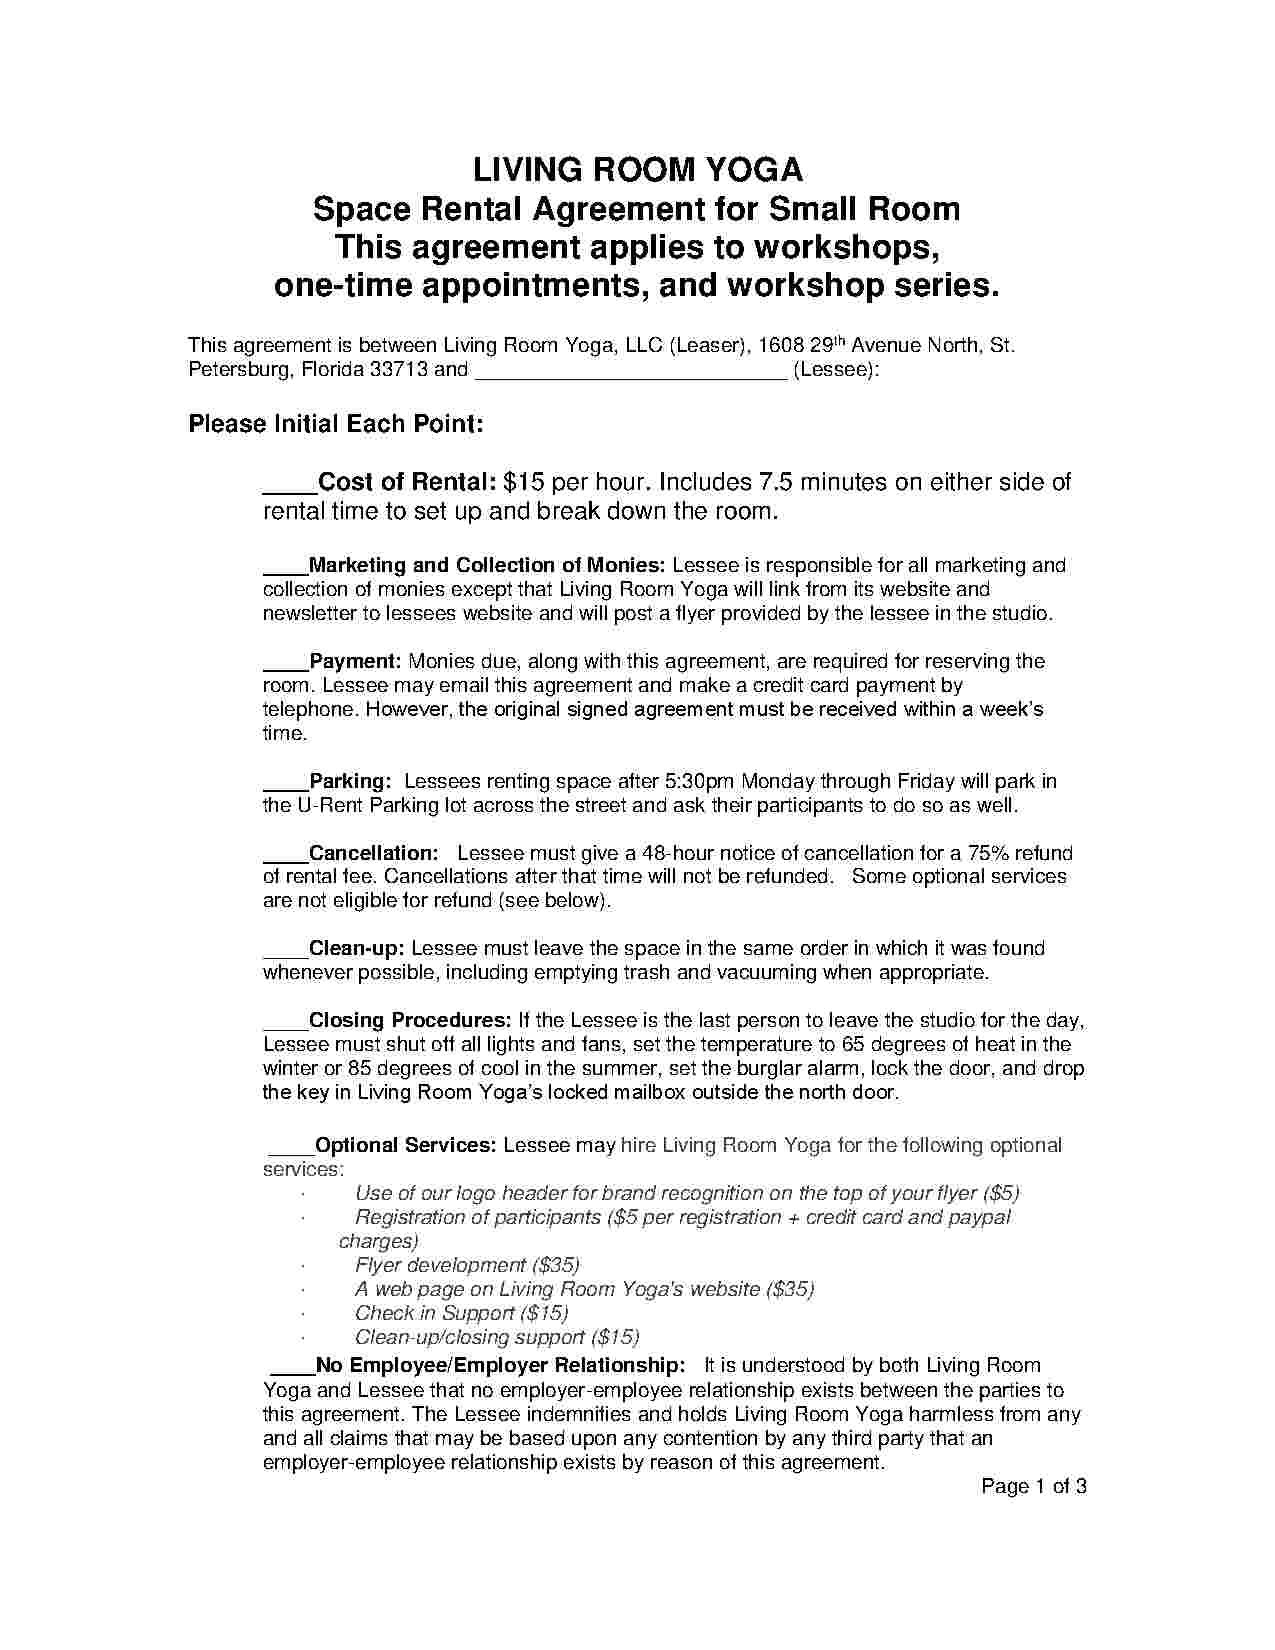 Download Room Rental Agreement Style  Template For Free At regarding Dance Studio Rental Agreement Template